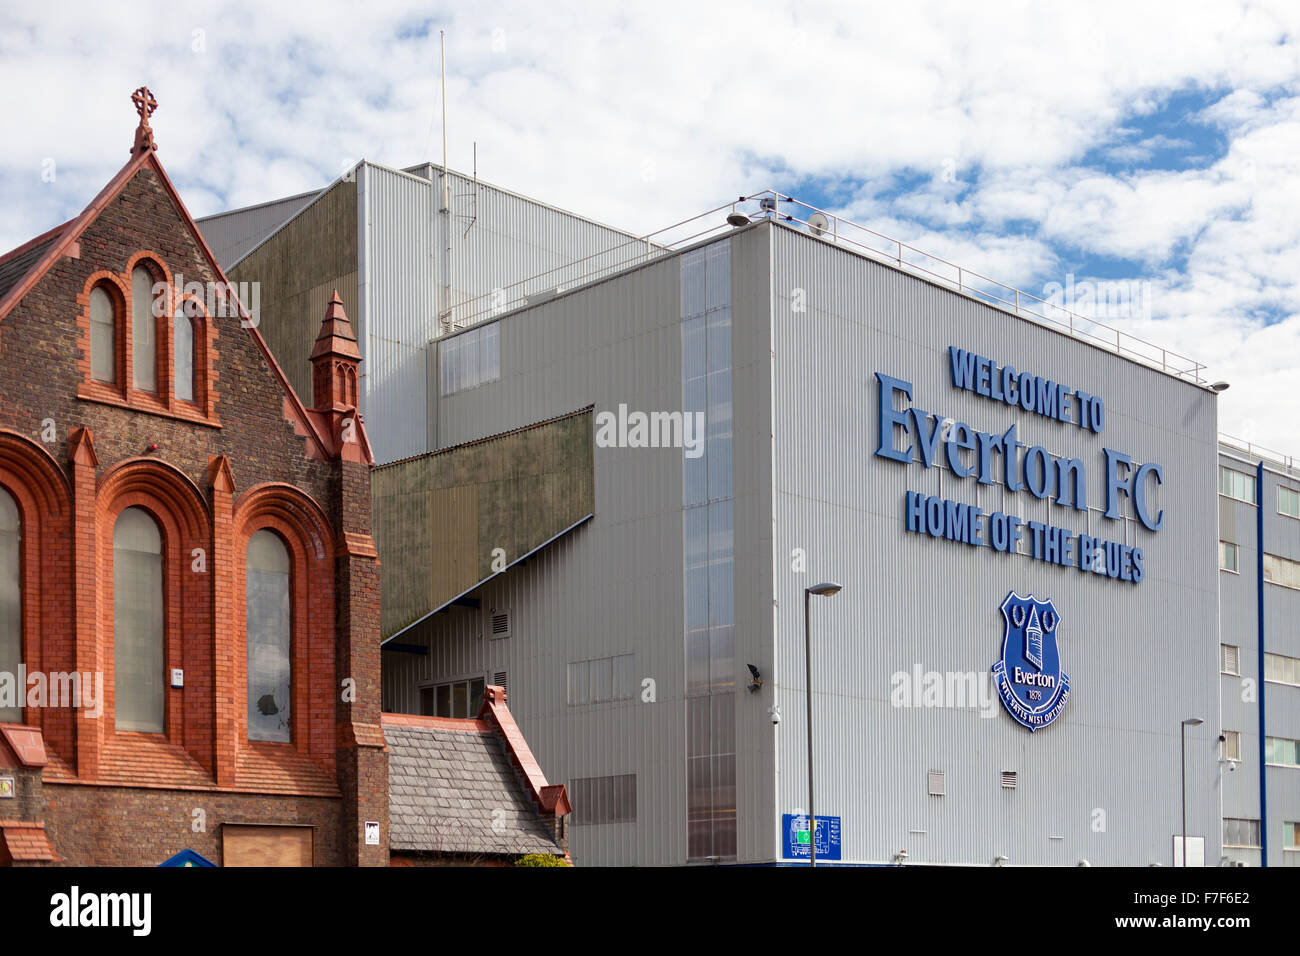 Images documentaires, FC Everton Goodison du Liverpool FC, Anfield, Liverpool, Angleterre Banque D'Images